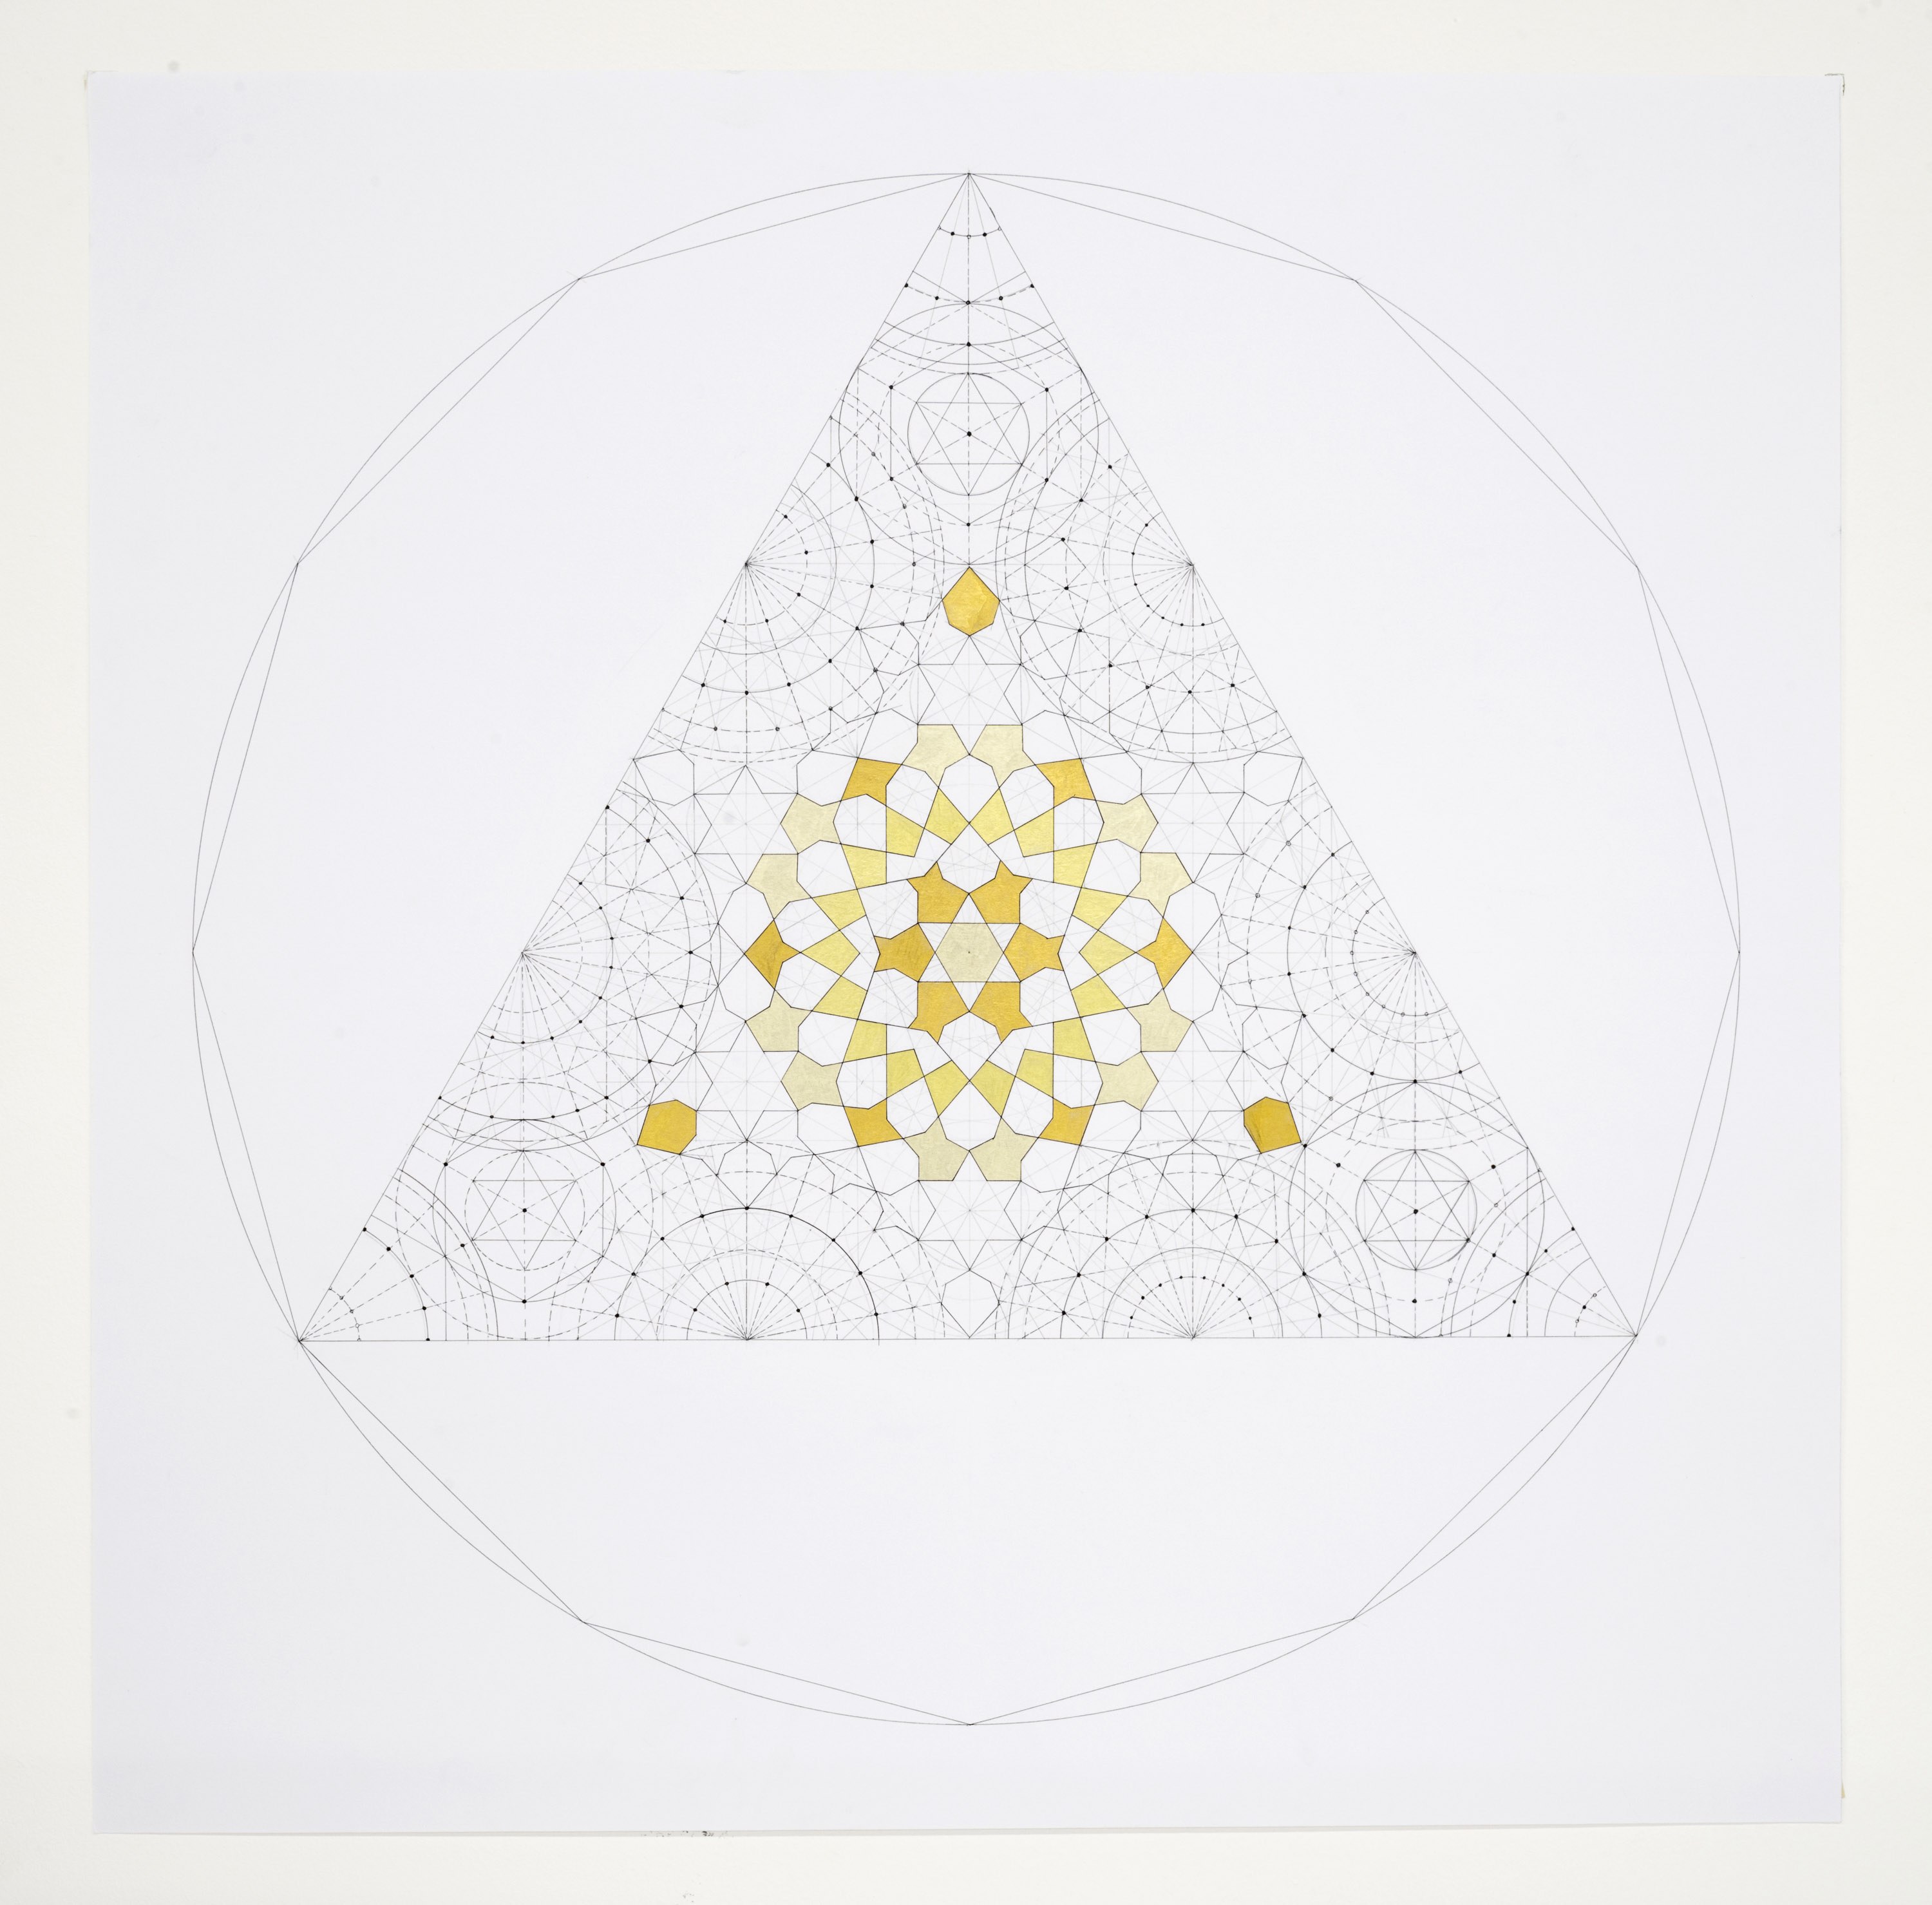 Dana Awartani, “Octahedron within a Cube from the Platonic Solid Duals Series”